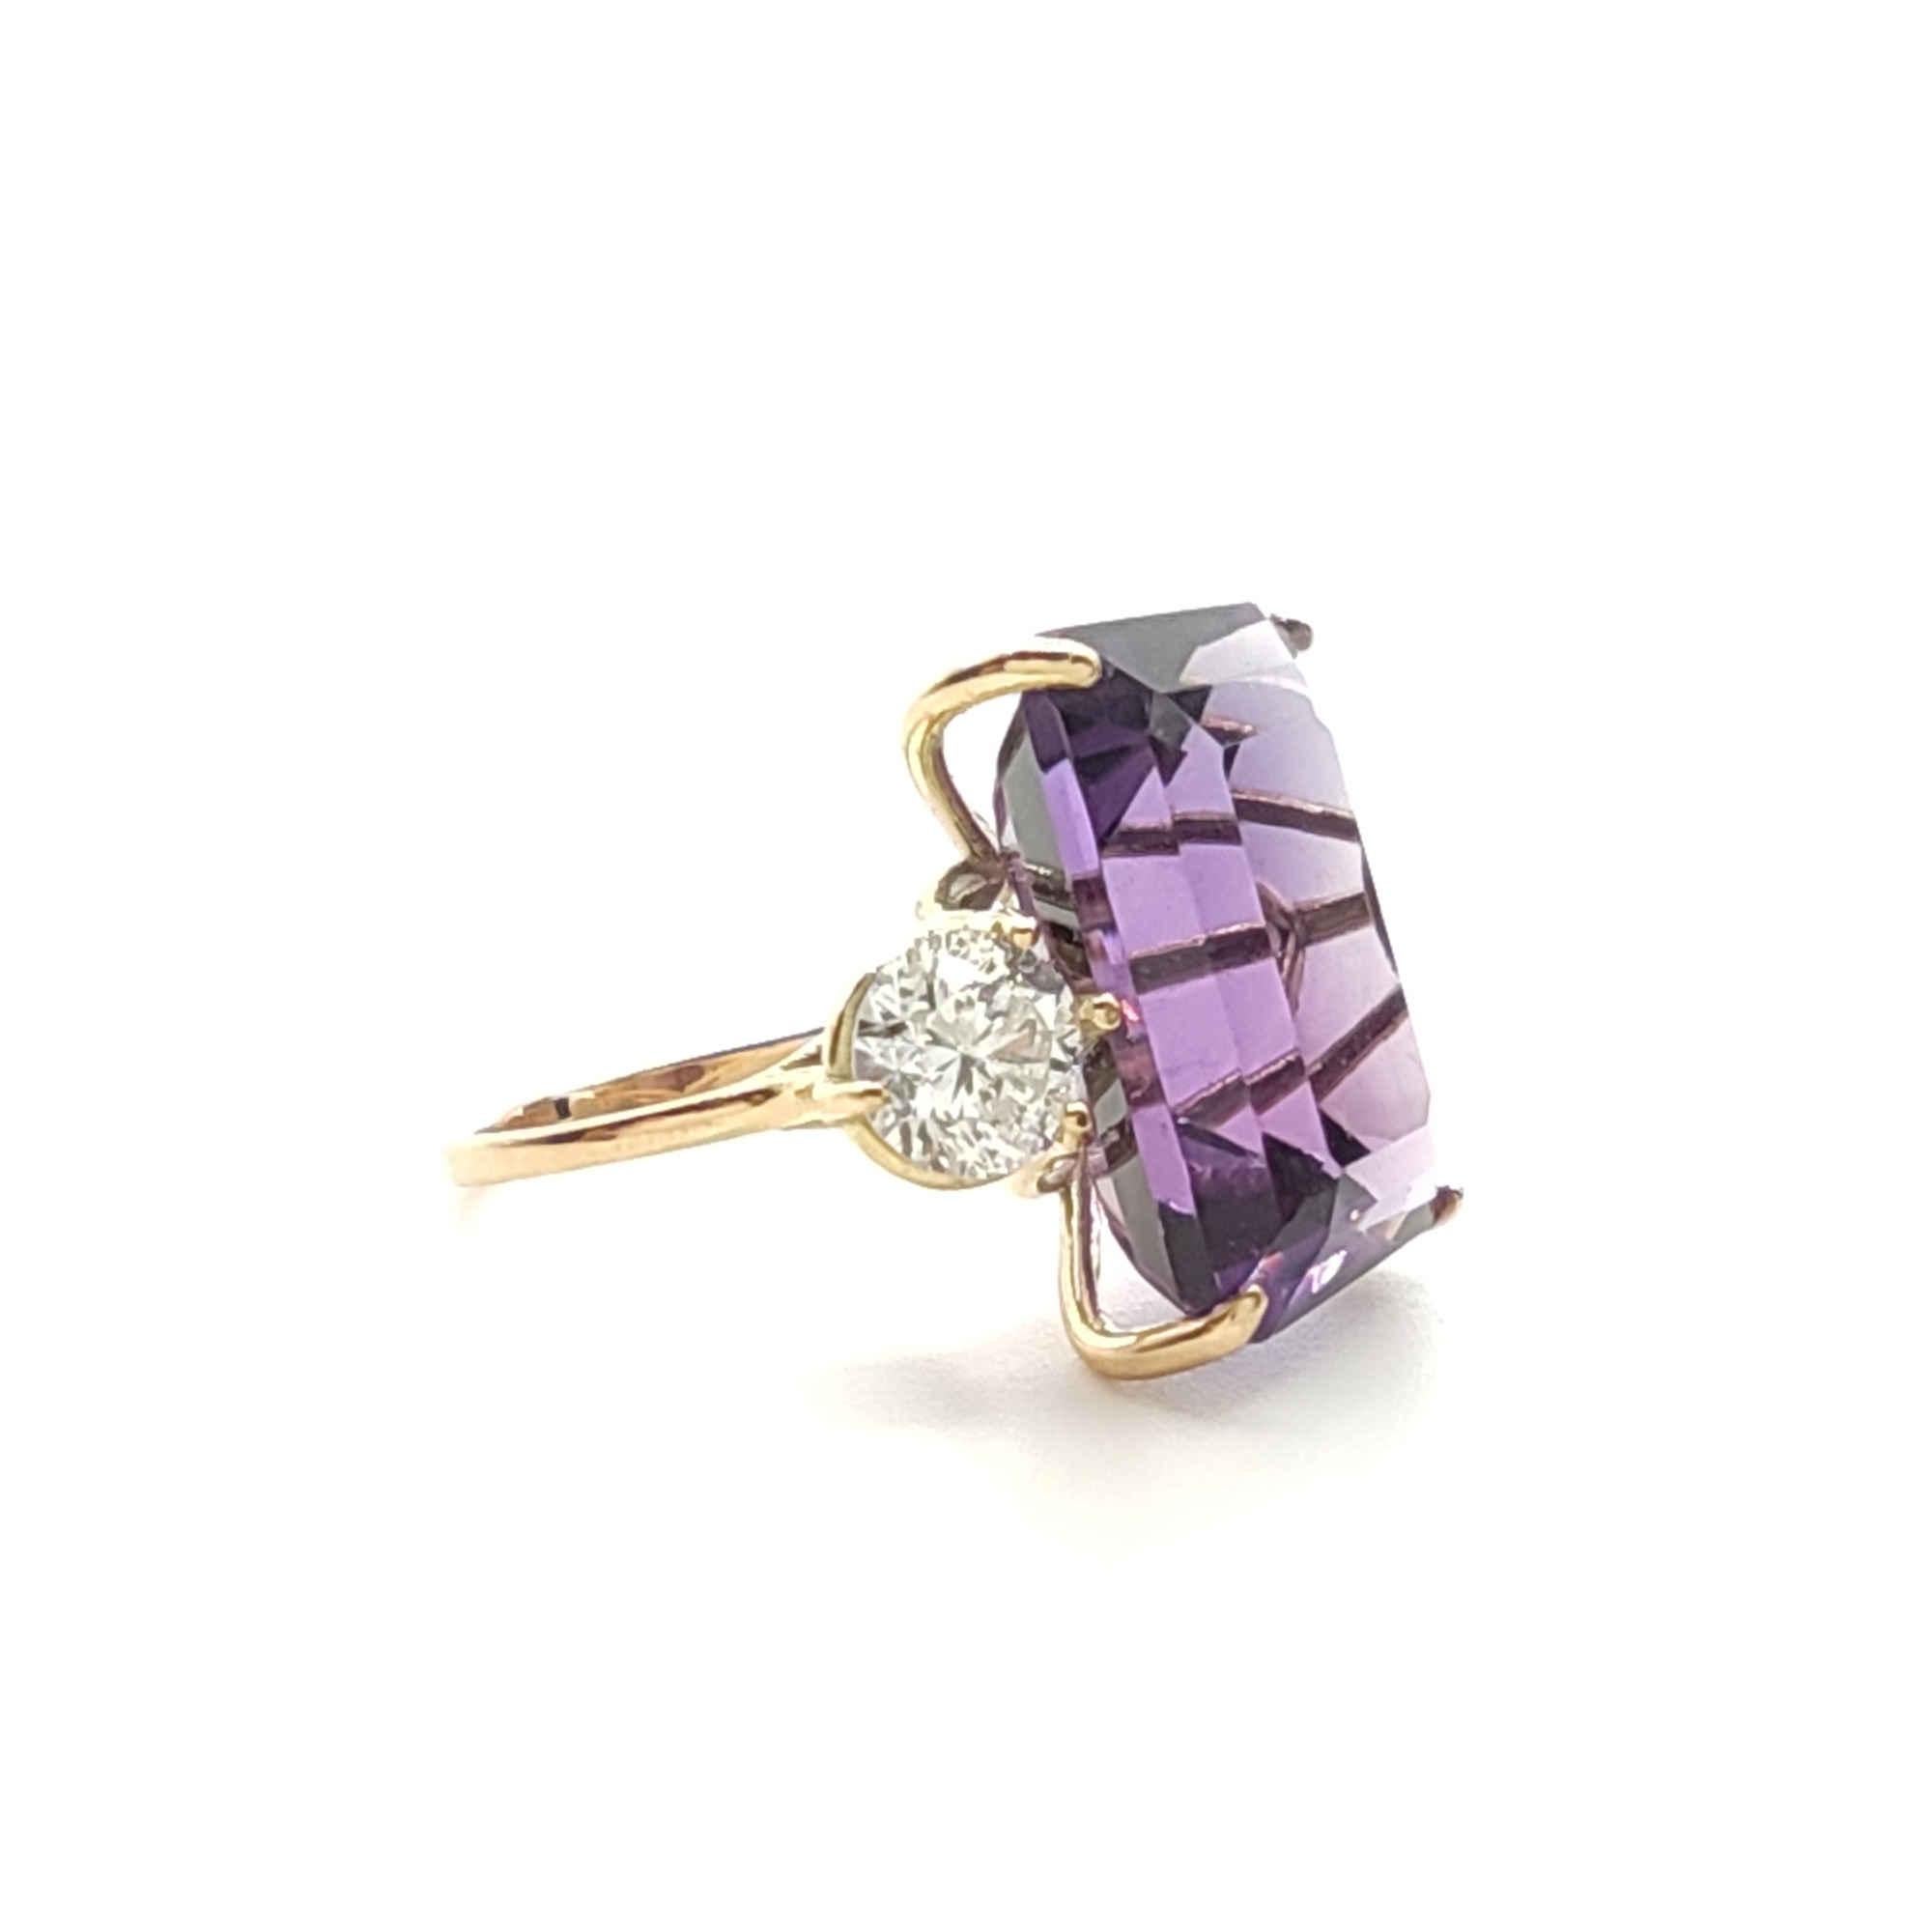 IGE Certified 17.28 Carat Amethyst Diamond Cocktail Ring For Sale 3